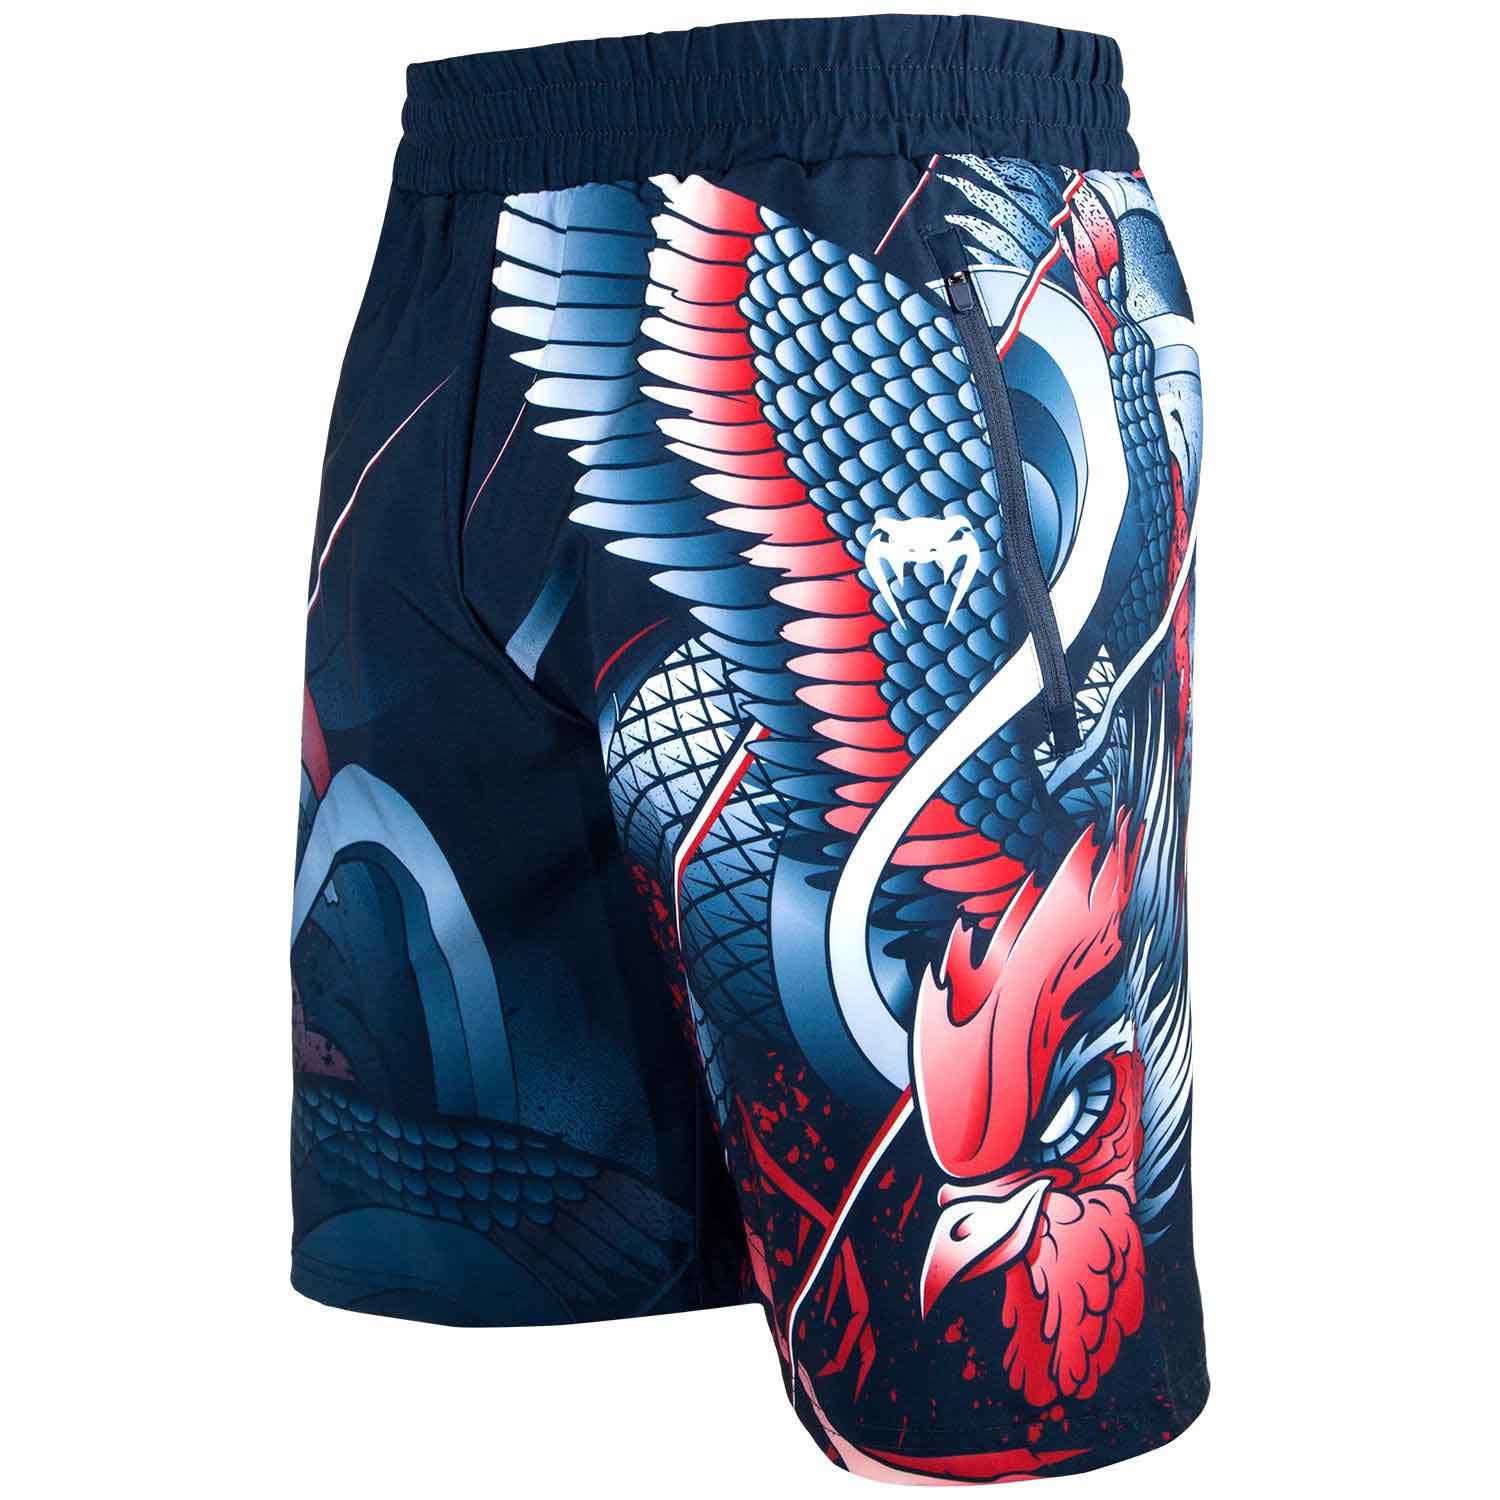 ROOSTER FITNESS SHORTS／ルースター フィットネスショーツ